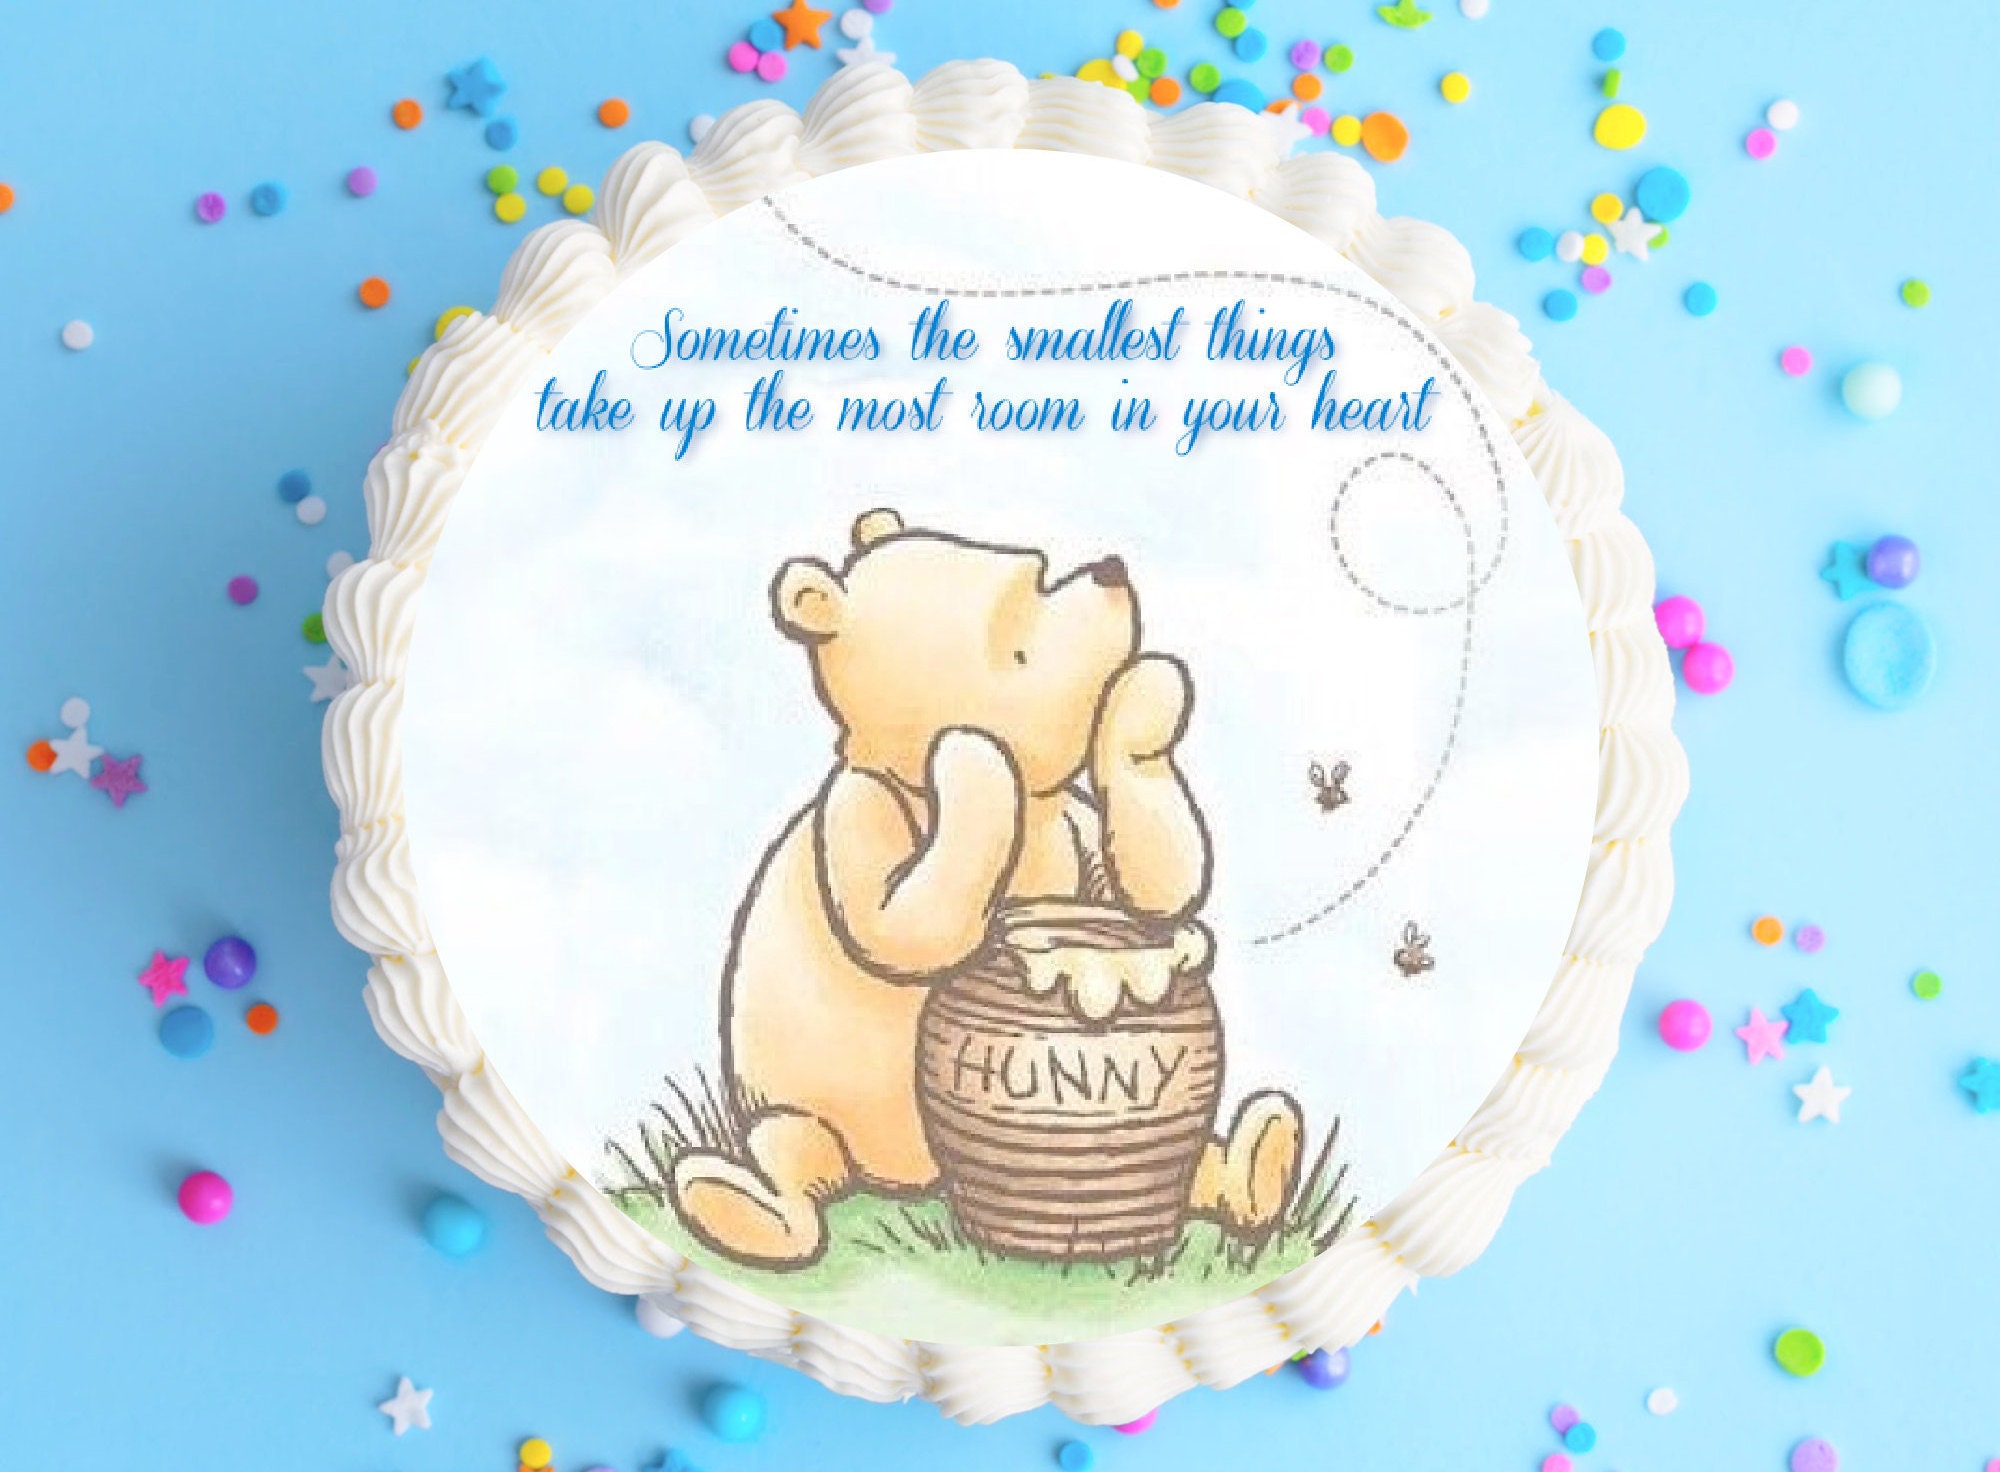 Baby Pooh Classic Winnie the Pooh Vintage Pooh Inspired Cake